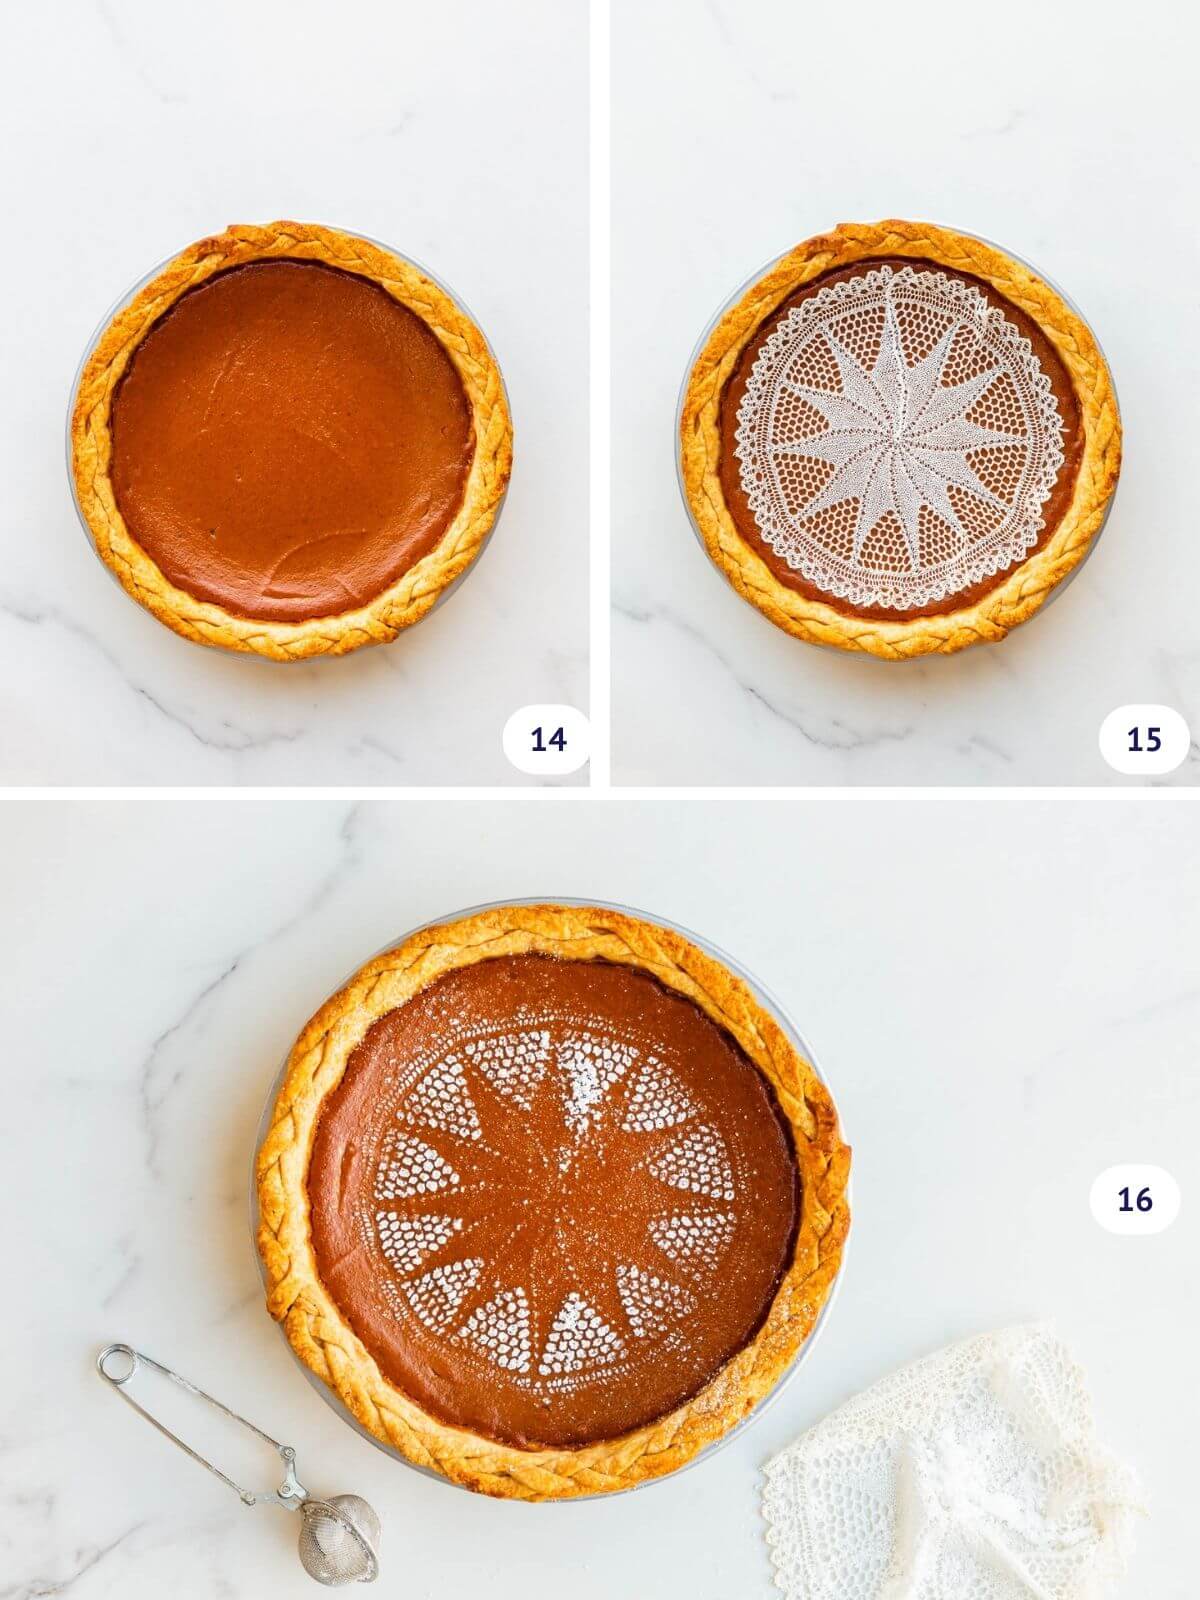 Stencilling the smooth top of a custard pie (like pumpkin or apple butter pie) with icing sugar to decorate it easily.